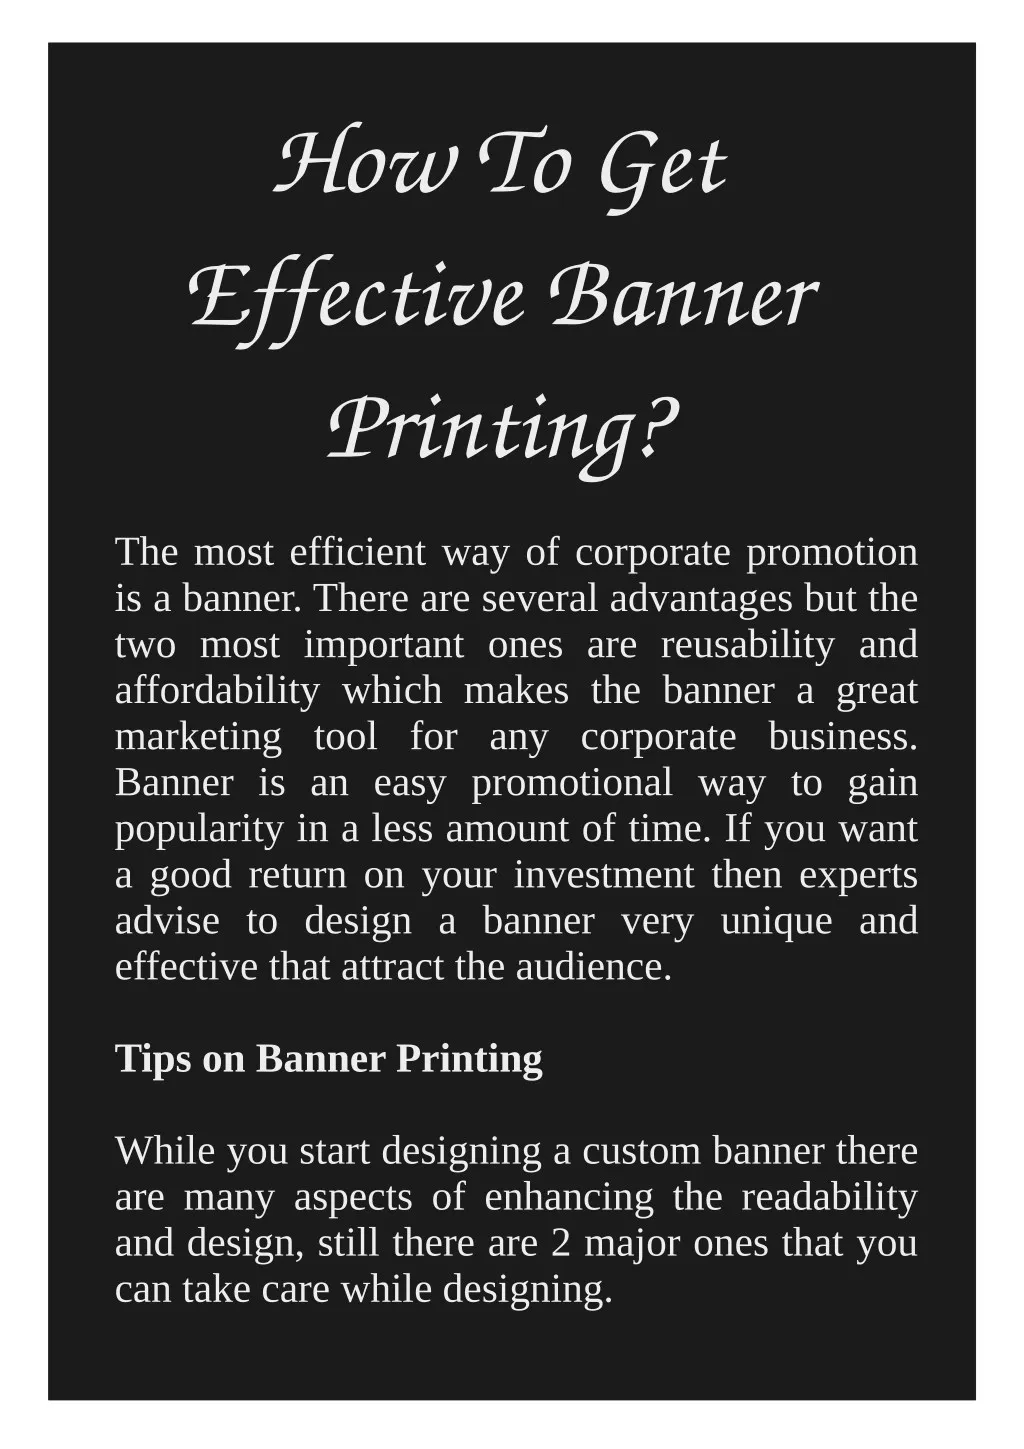 how to get effective banner printing